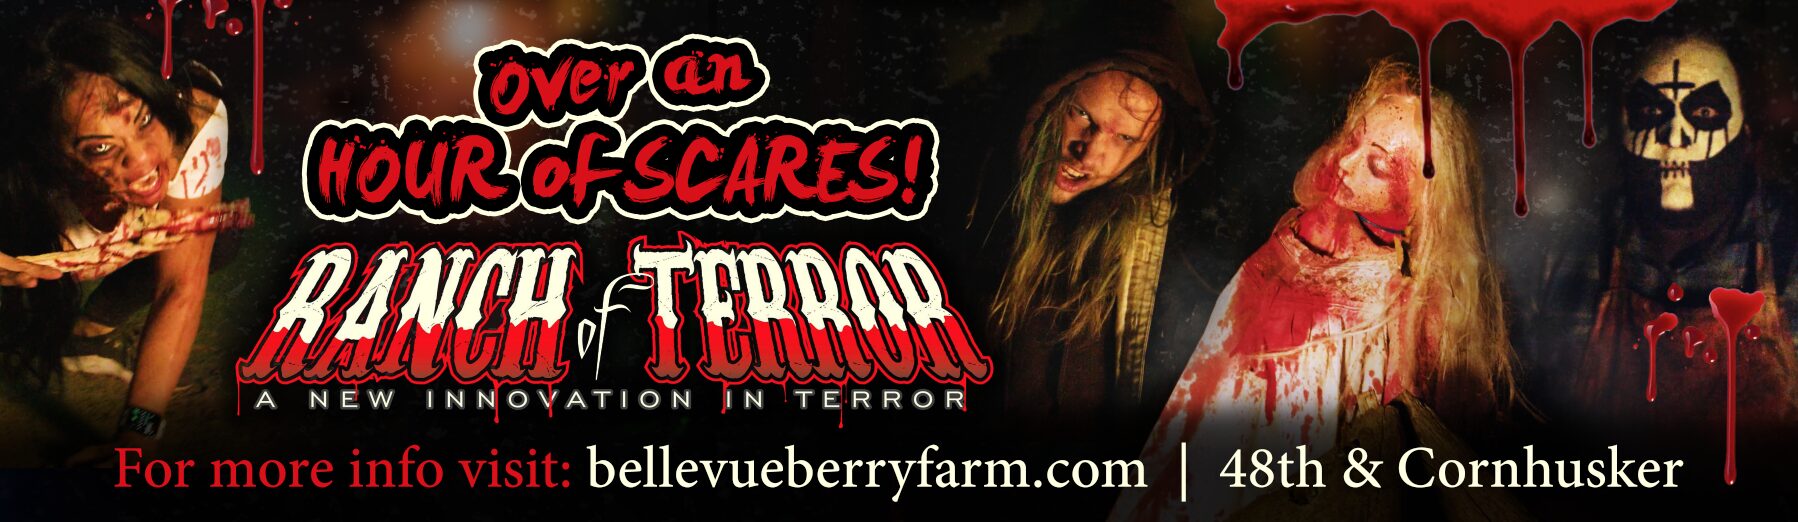 Step into the spine-chilling world of 'ranch of terror' at bellevue berry farm—where frights await at every turn, promising over an hour of heart-pounding scares!.